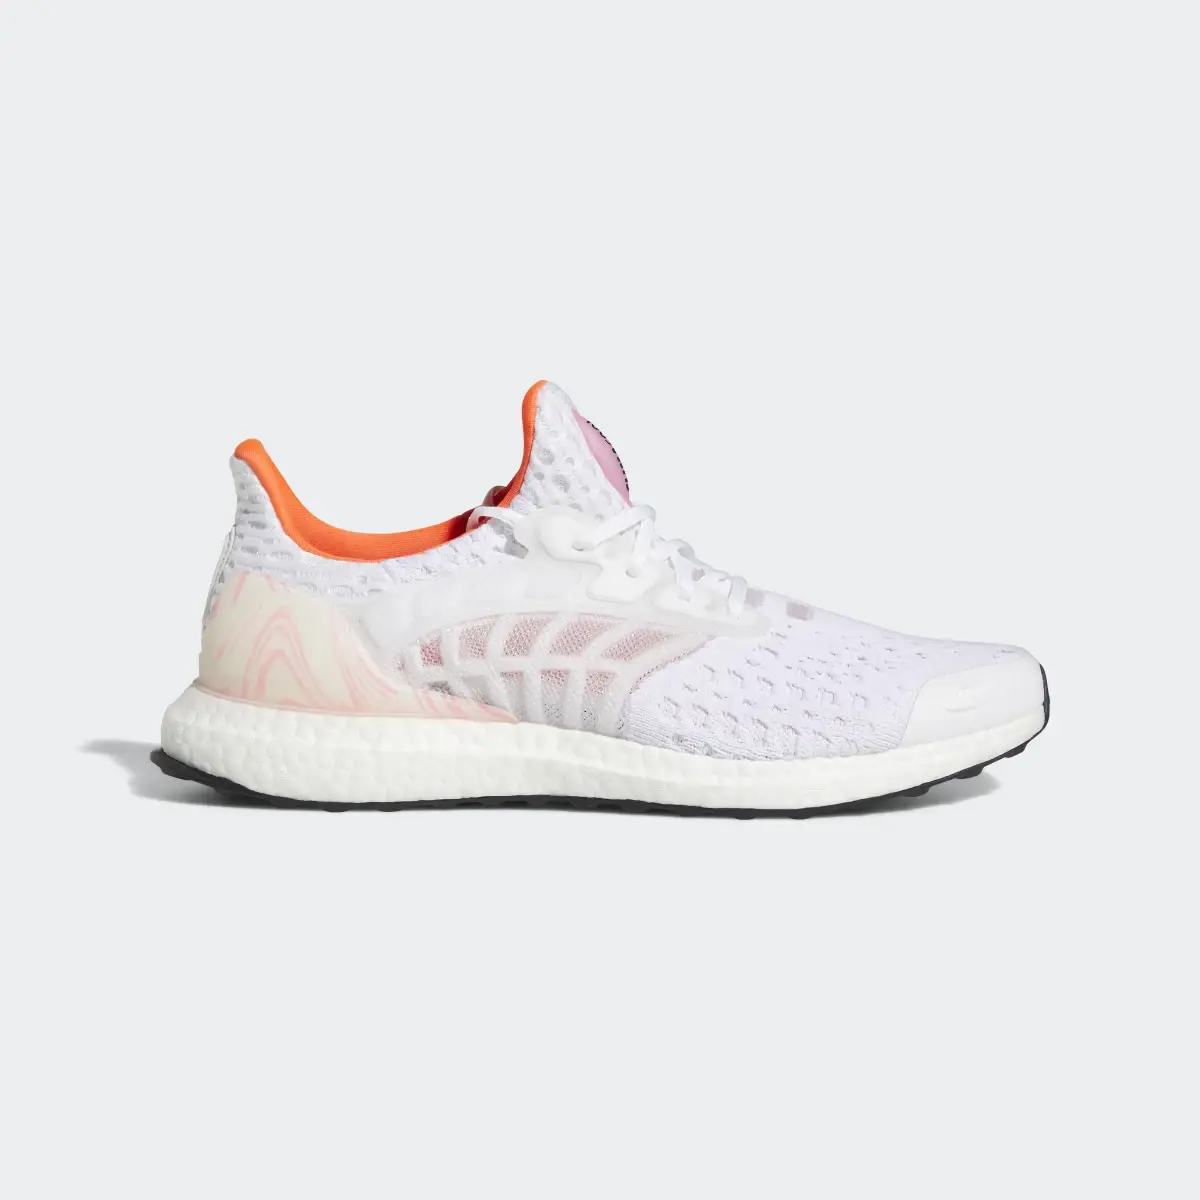 Adidas Chaussure Ultraboost CC_2 DNA Climacool Running Sportswear Lifestyle. 2